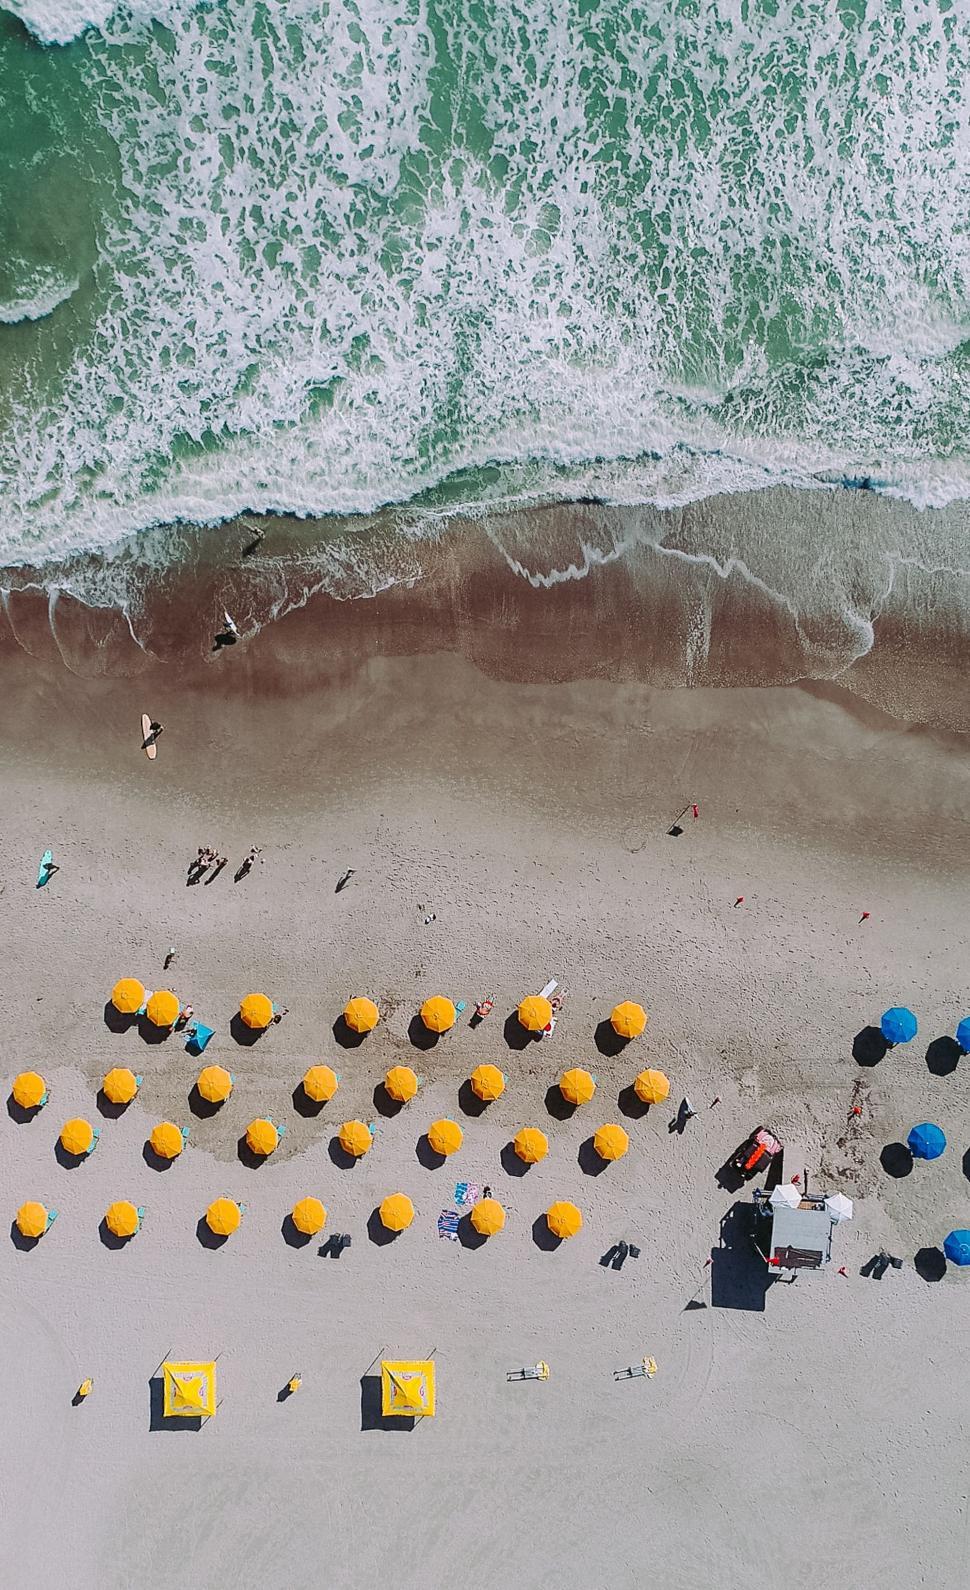 Free Image of Aerial View of Beach With Umbrellas and Chairs 